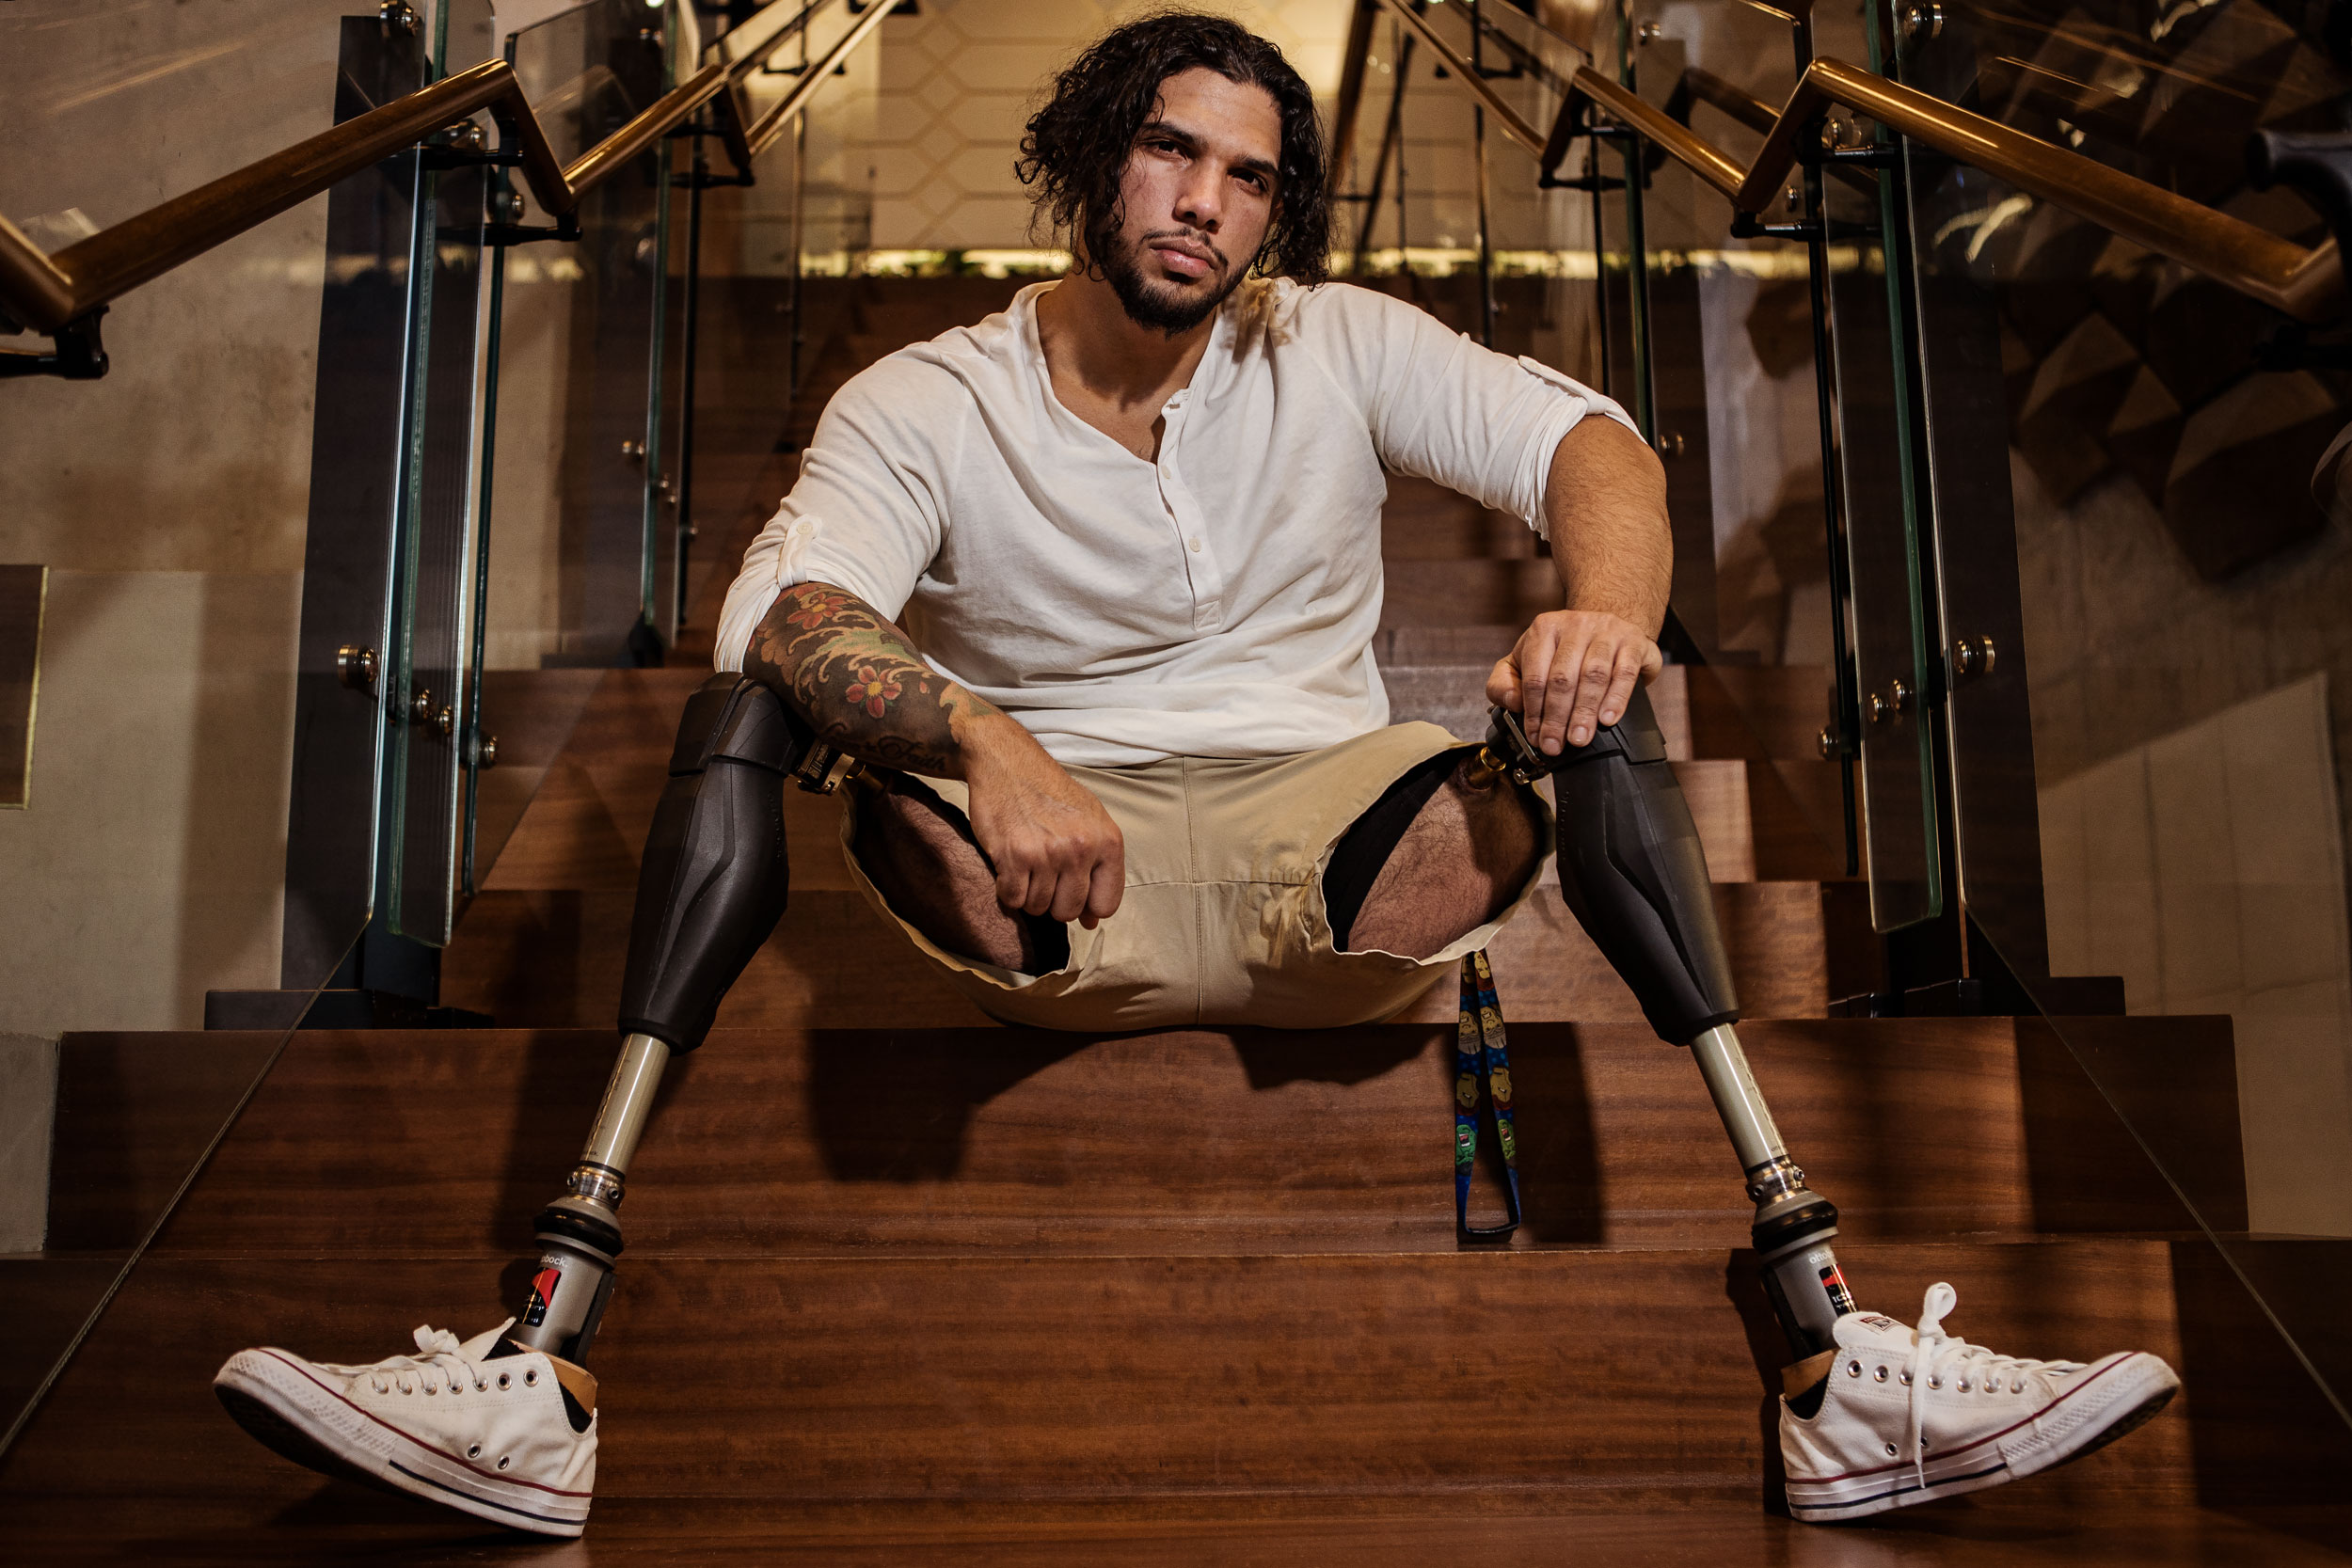 Paralympic Athlete Ray Diaz Portrait by Michael Weschler Photography, New York City